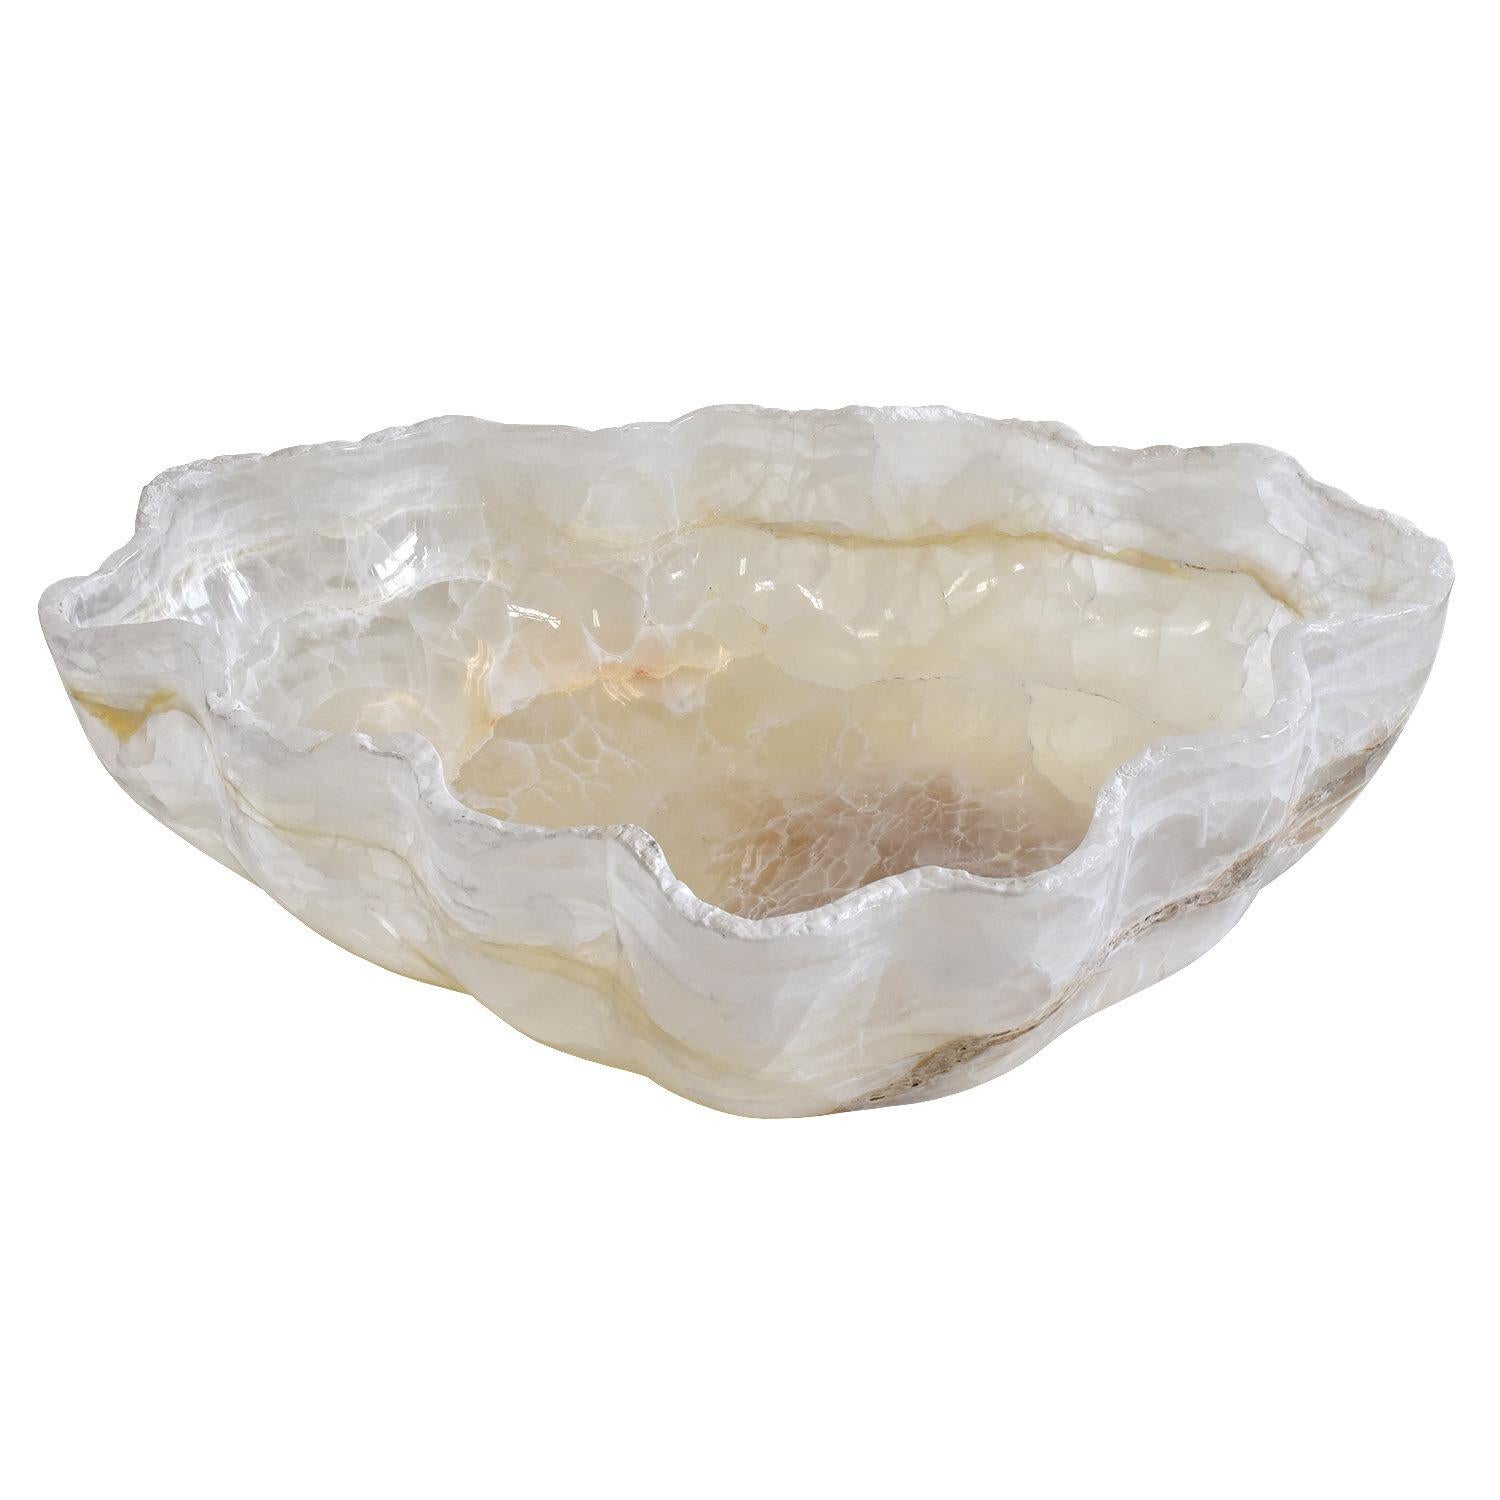 Handmade in Mexico
One solid piece of onyx
One of a kind
Dimensions: 21.5 x 20.25 w x 6.5 h in. / 55 x 51 x 16.5 cm

A spectacular, organic, undulating vessel of white to cream transparent stone with natural veining and inclusions. The deep